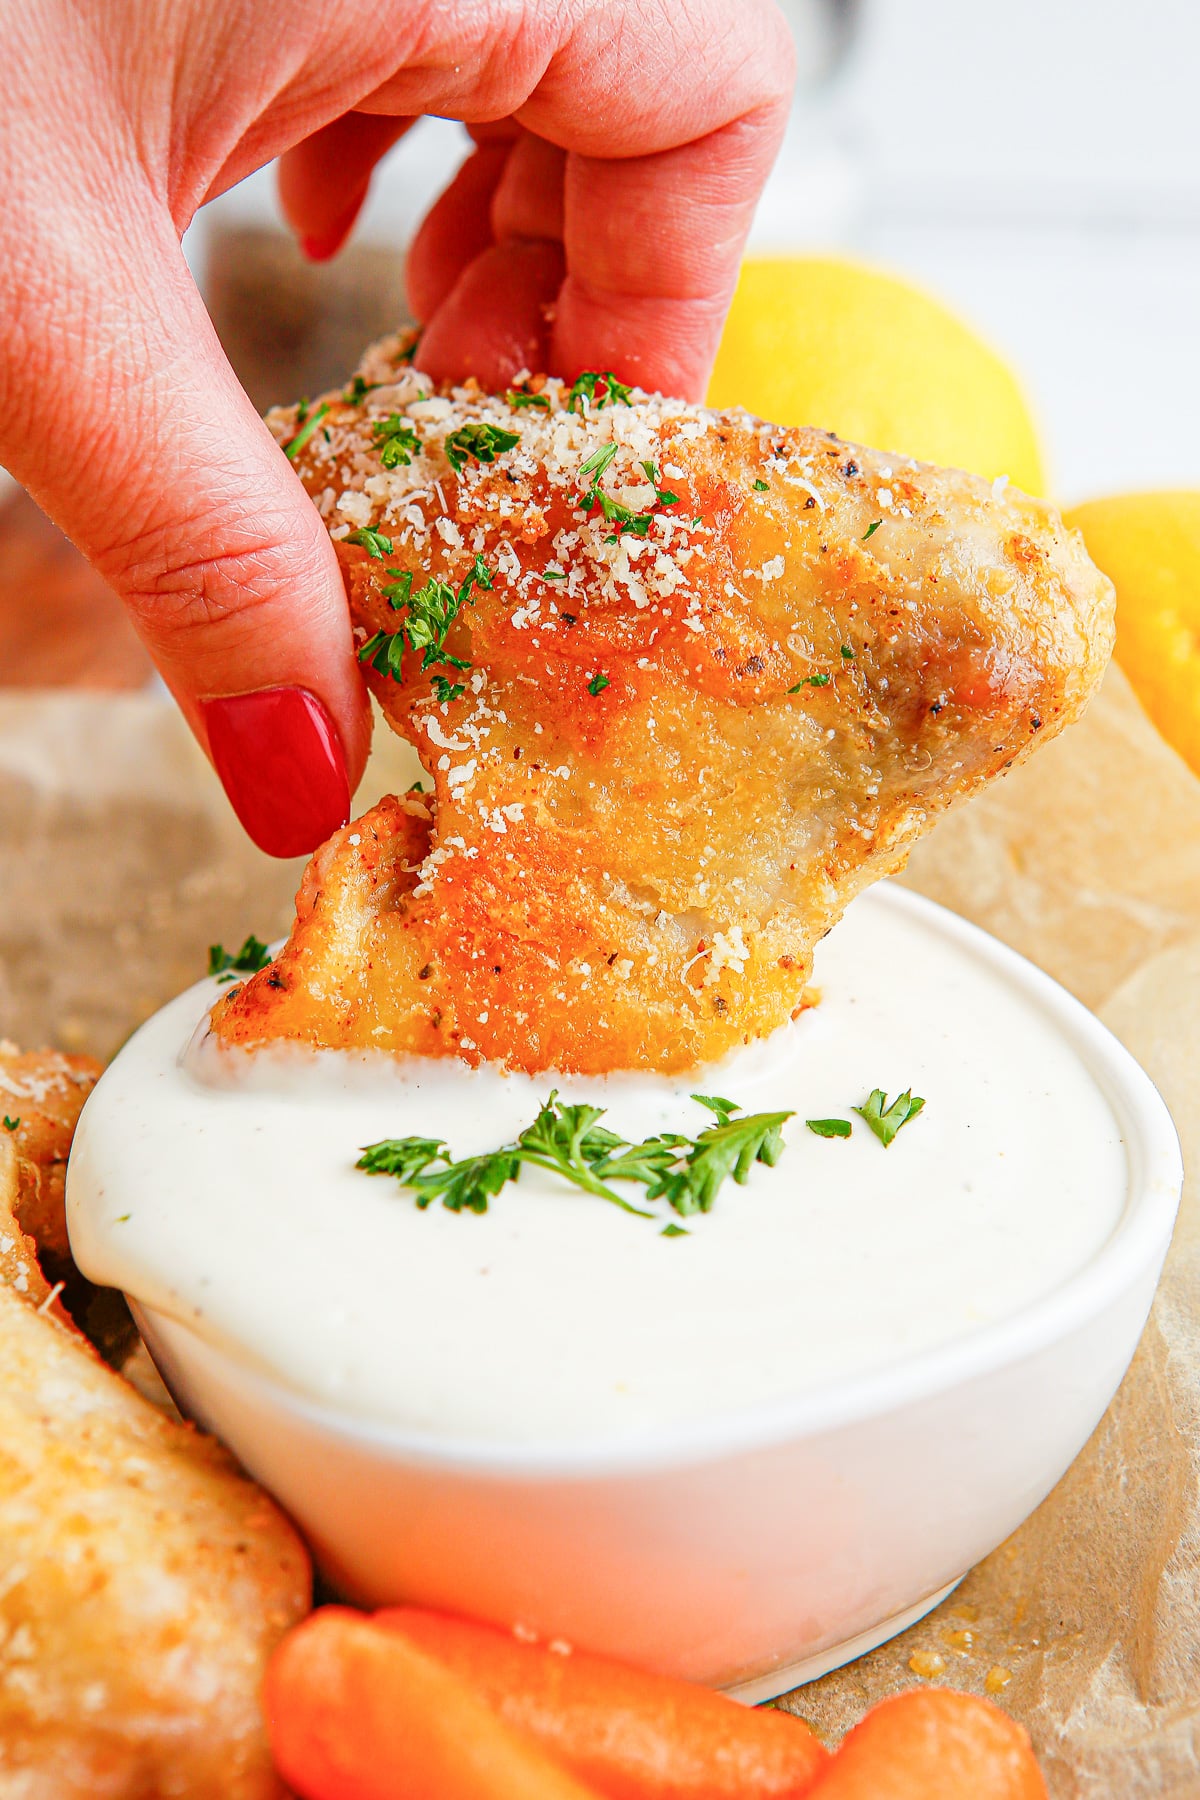 A person dipping a chicken wing into a bowl of dipping sauce.